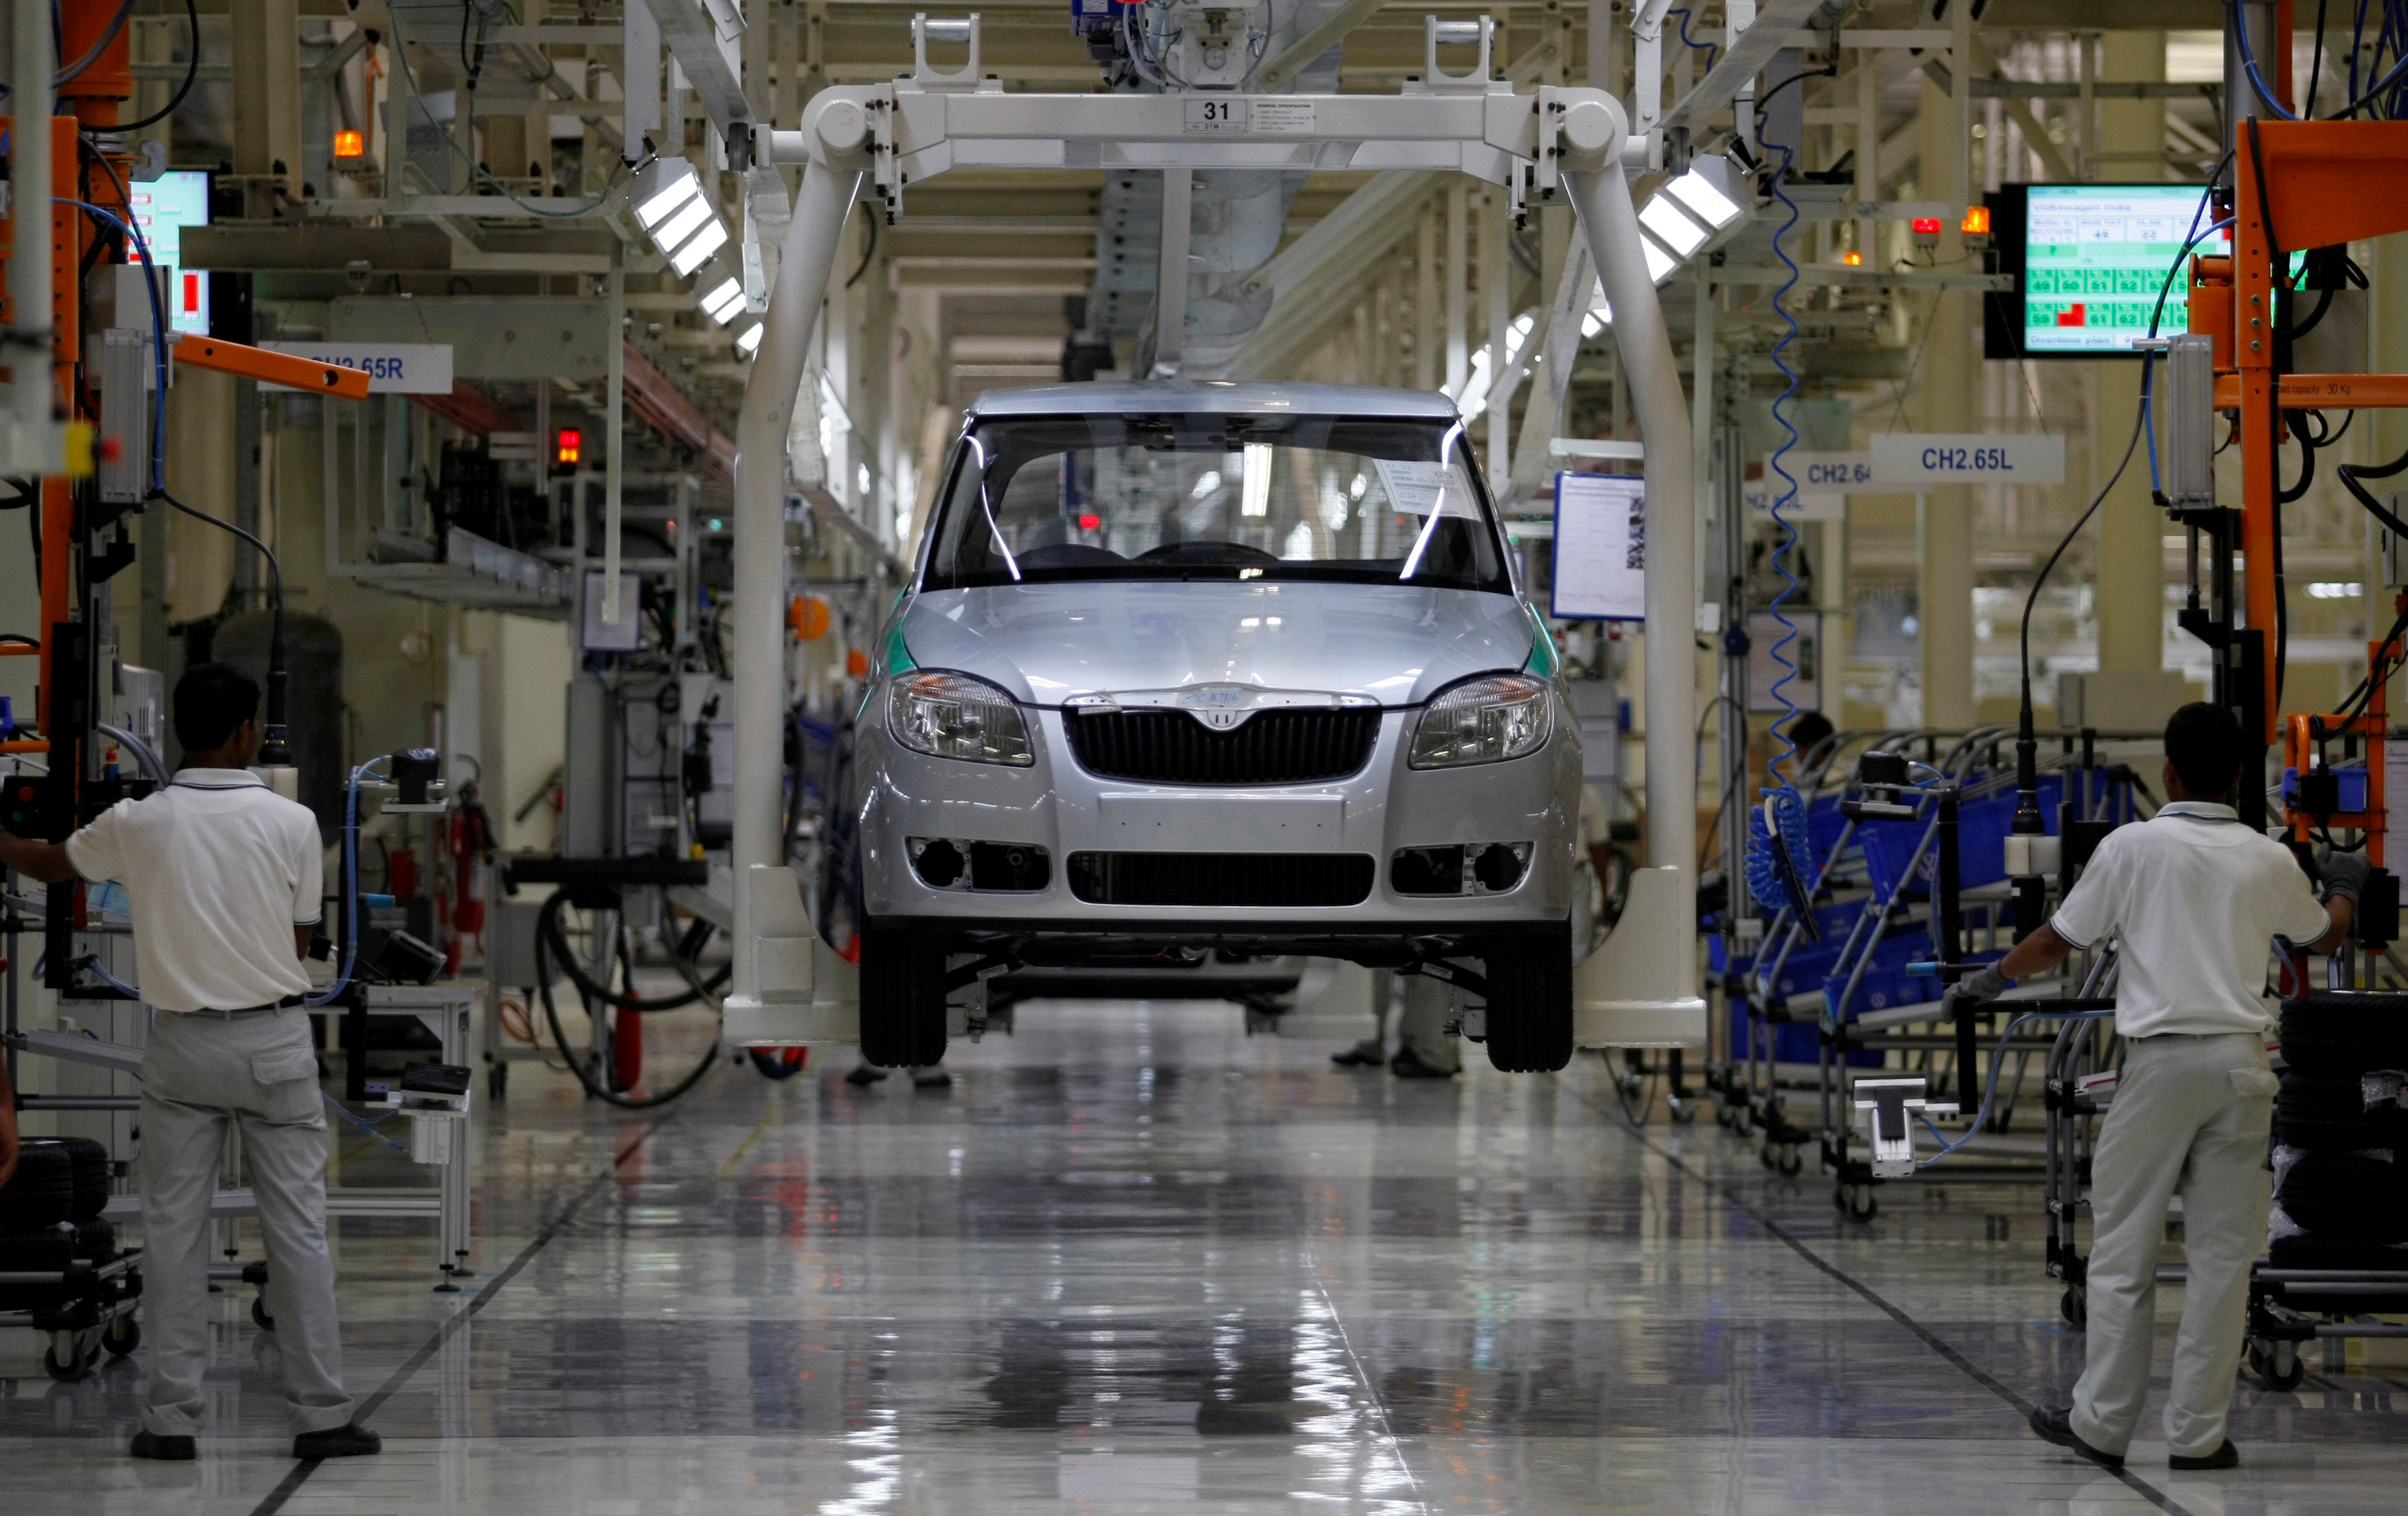 FILE PHOTO: Employees work at assembly line at Volkswagen's plant in Chakan